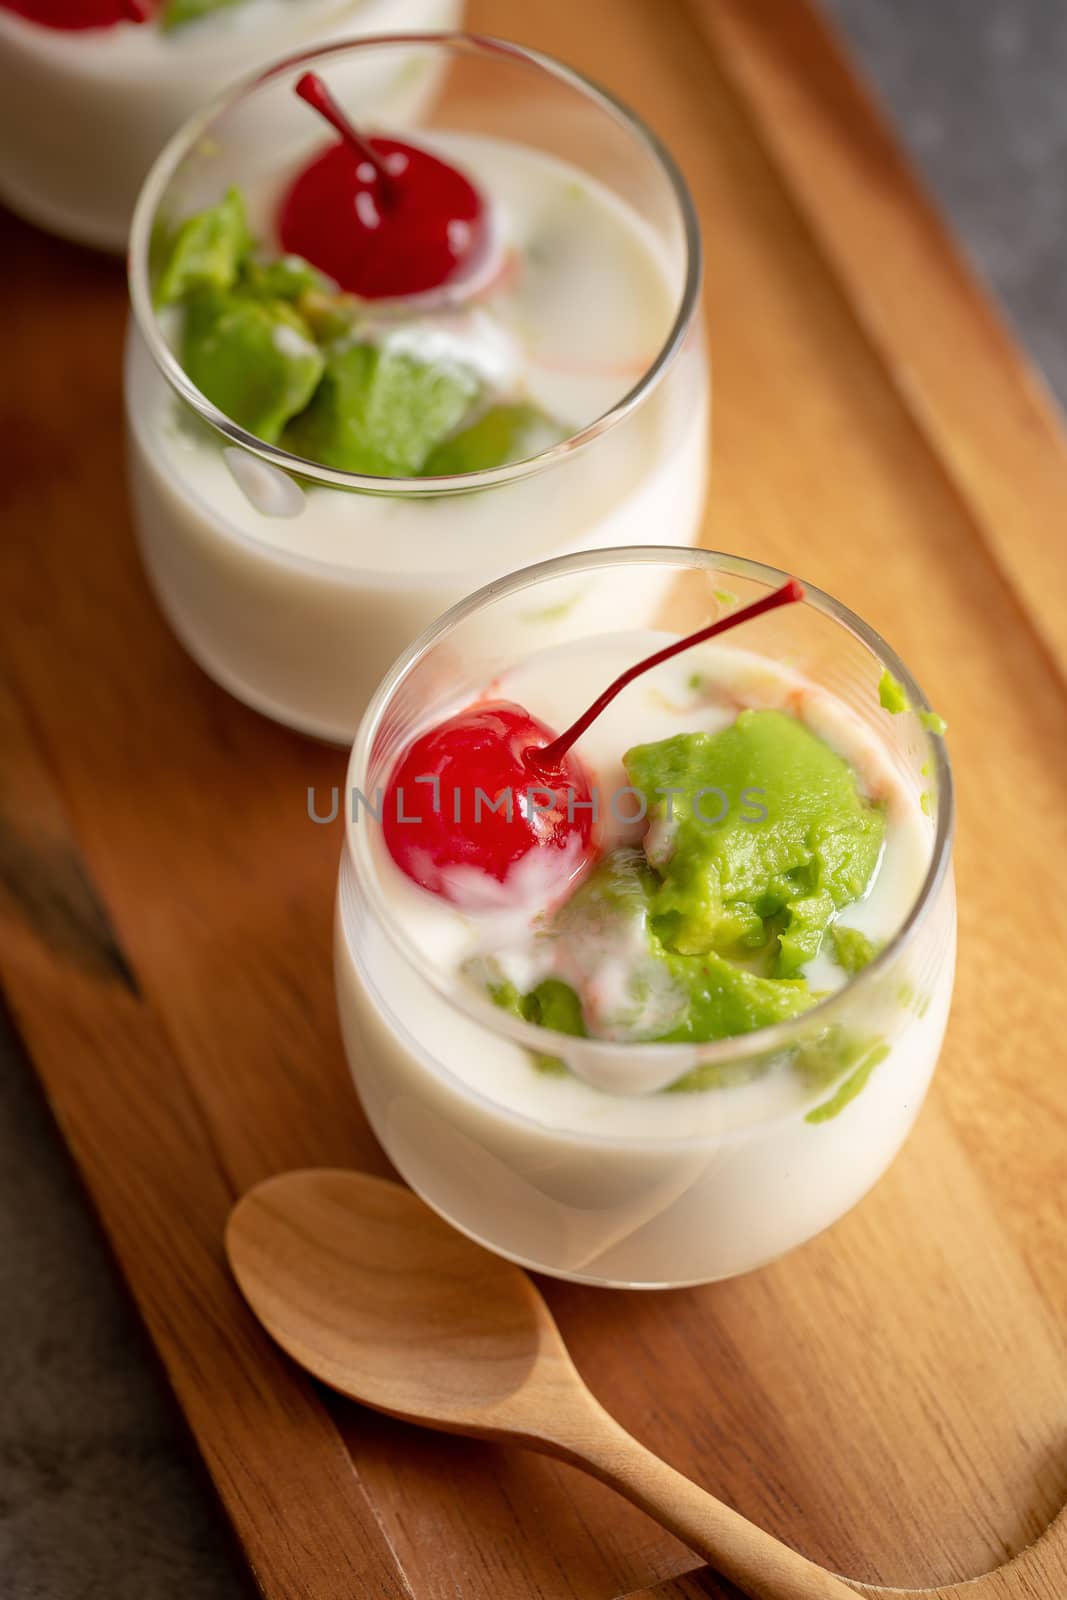 Glass of Cherry and avocado sliced in yogurt on wooden background.